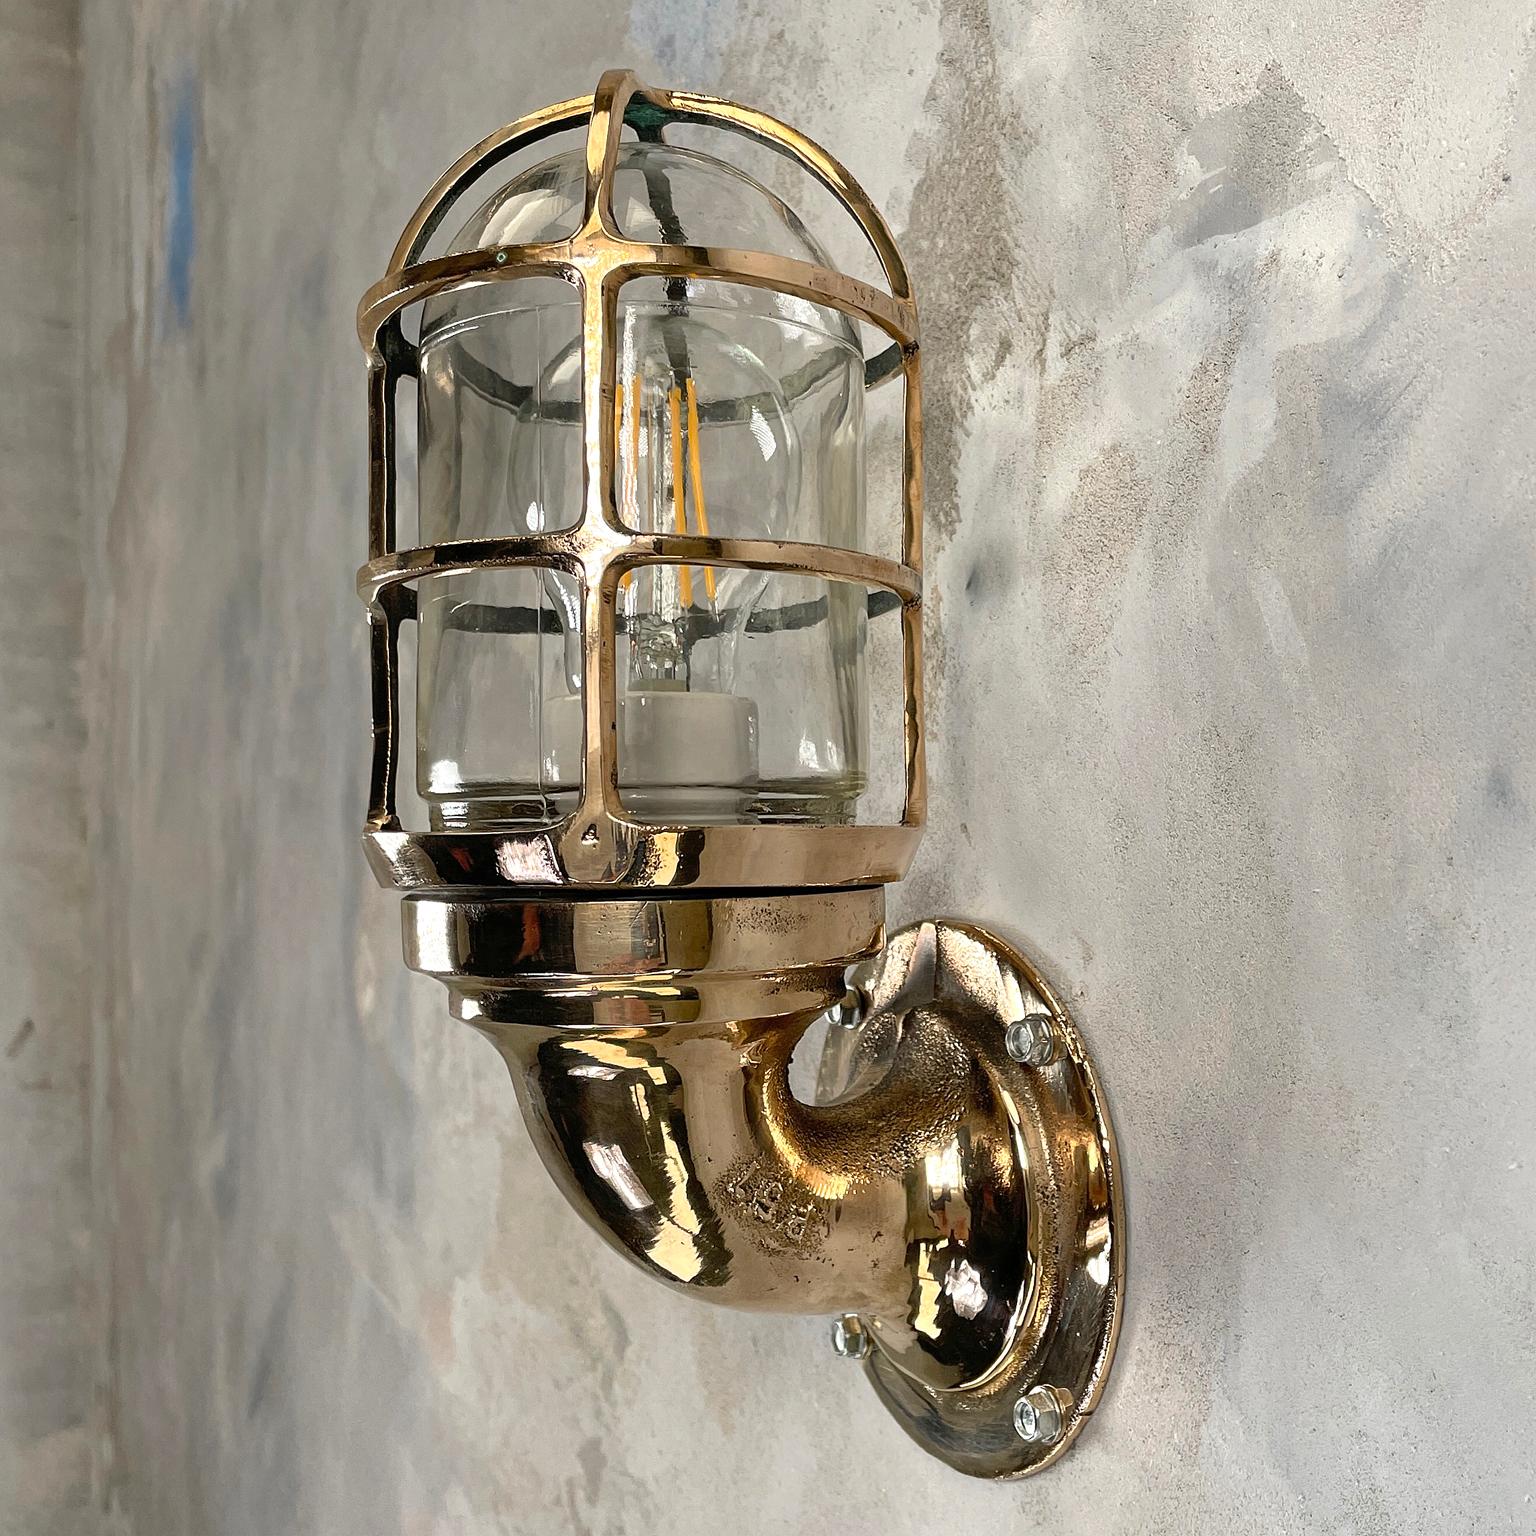 A vintage industrial 1960s Pauluhn bronze 90 degree wall sconce with industrial style cage & glass dome. Manufactured by American Company, Crouse-Hinds. Reclaimed and professionally restored by hand in UK by Loomlight, ready for contemporary